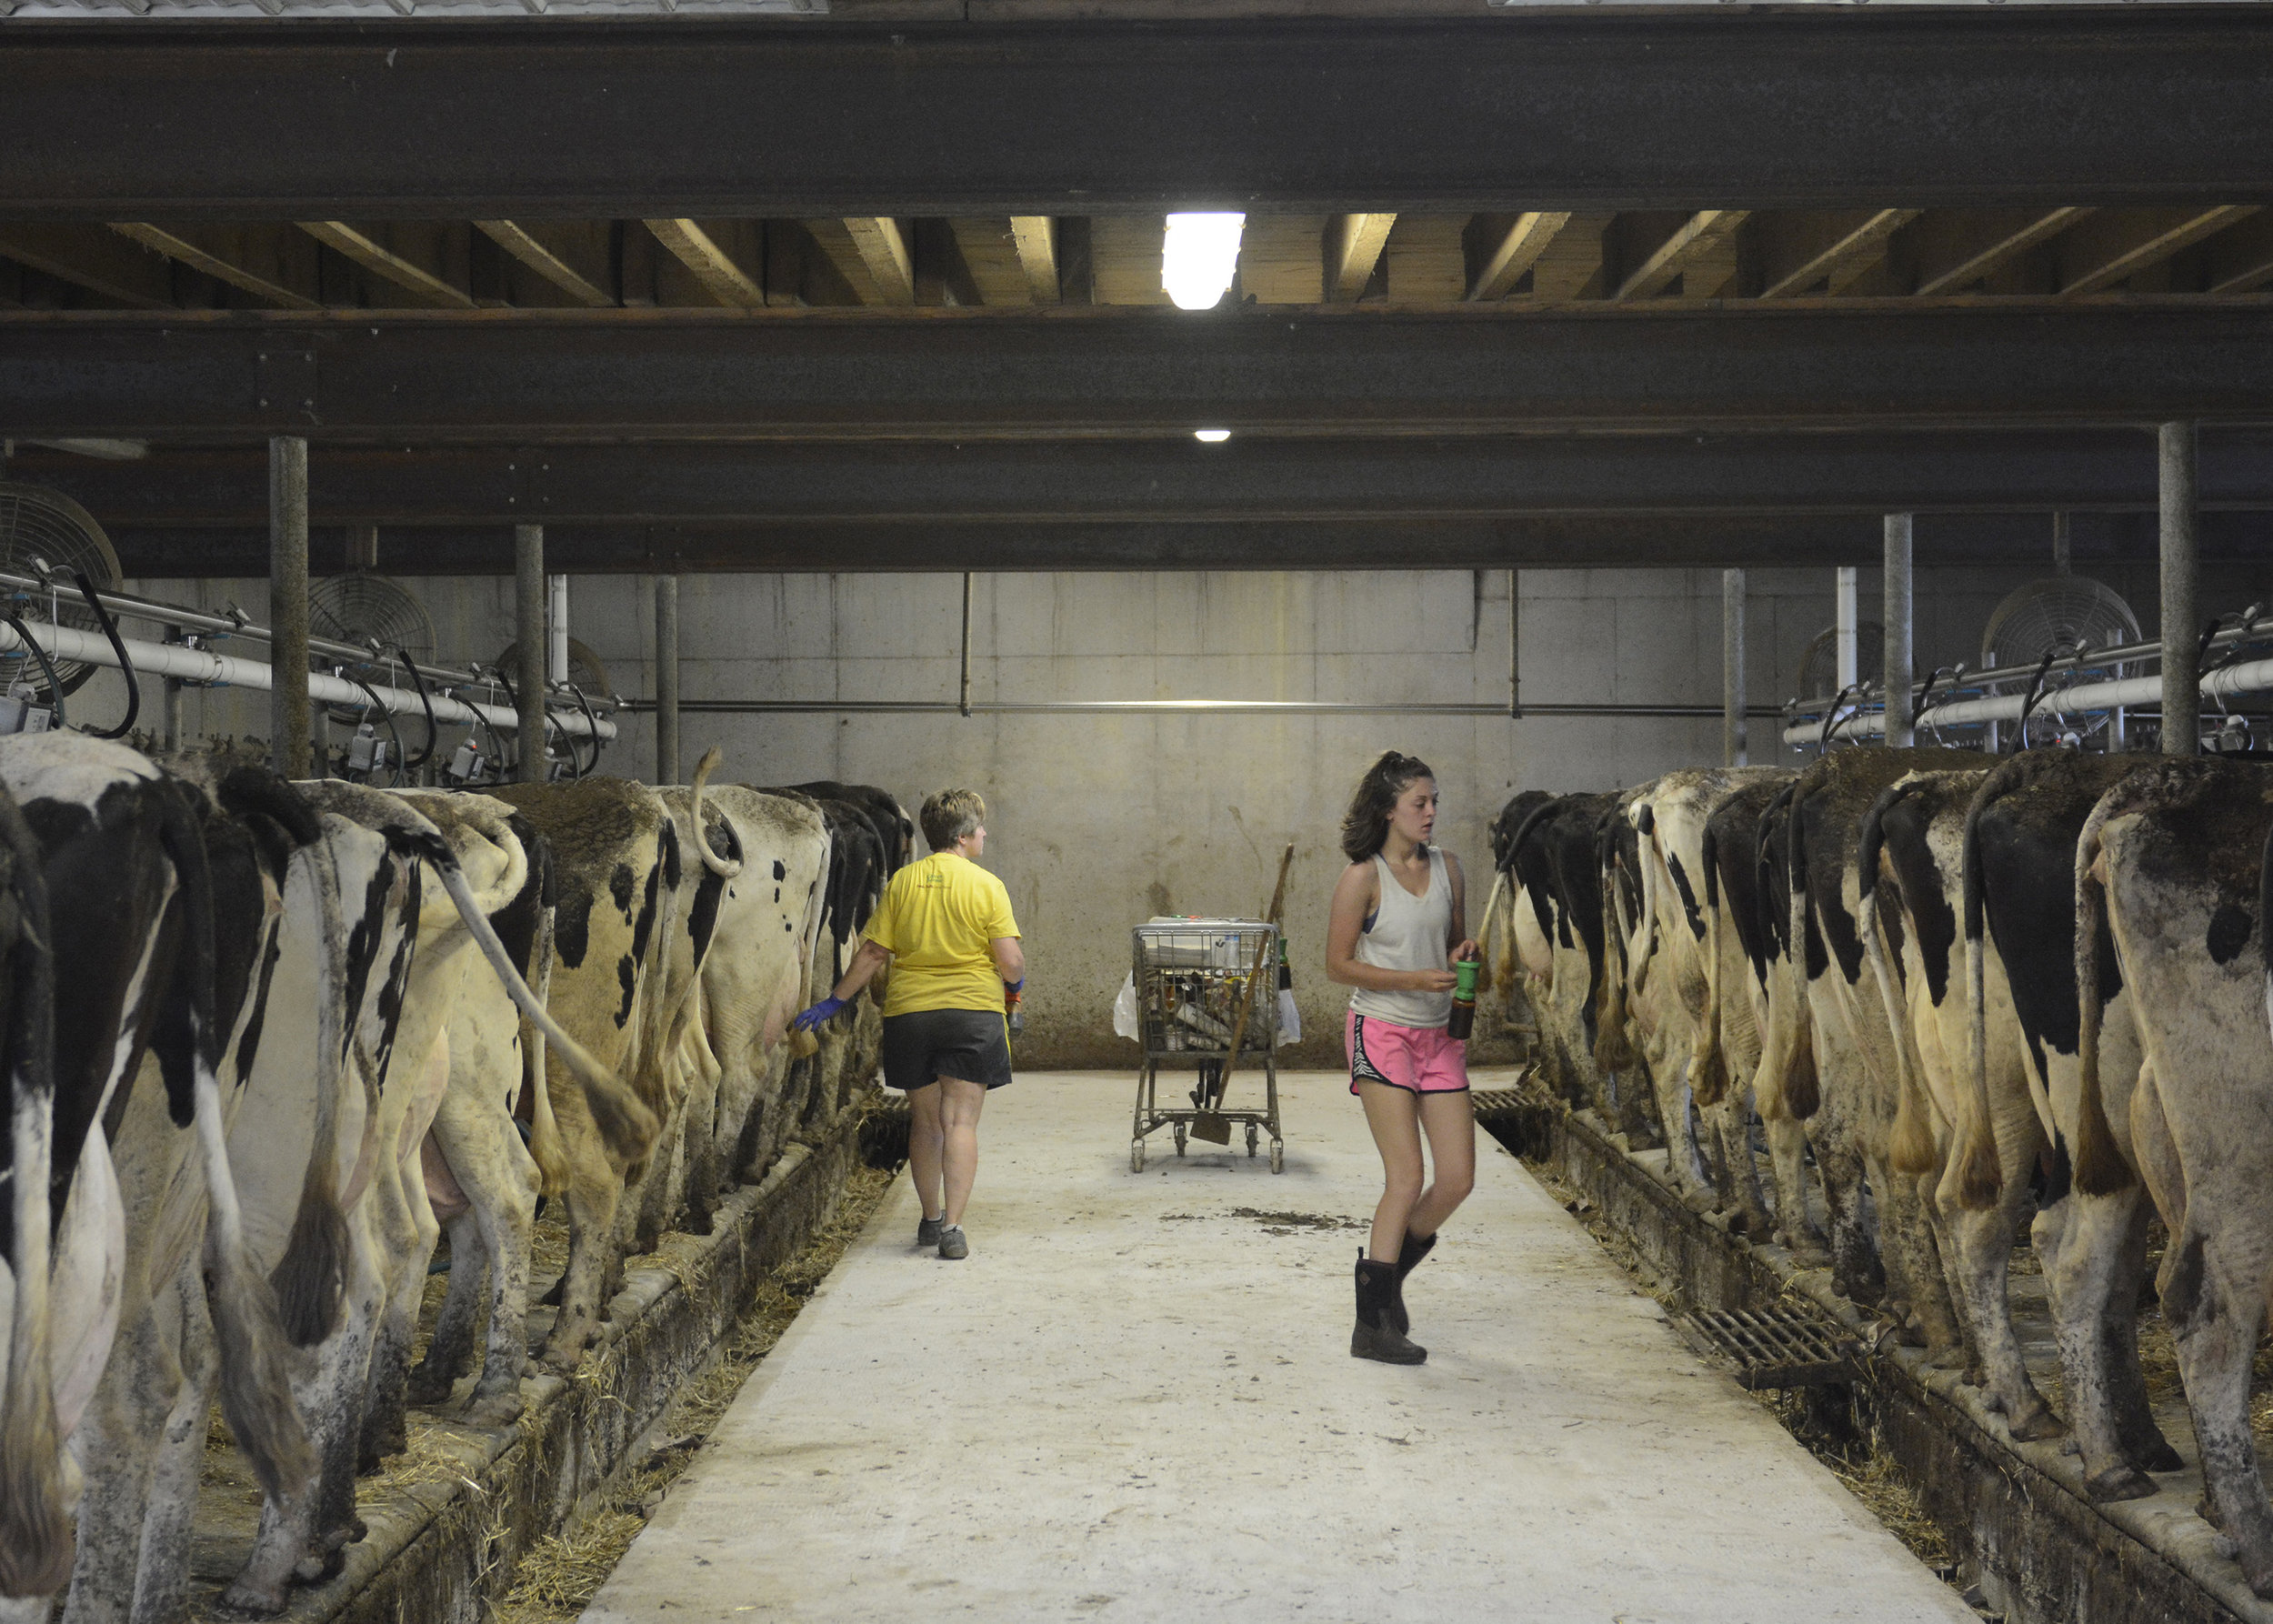  Sherrie (left) and Morgan Krick go through the duties that come with milking. The Krick's have enough cows to go through two "shifts" of dairy cows that get milked. 